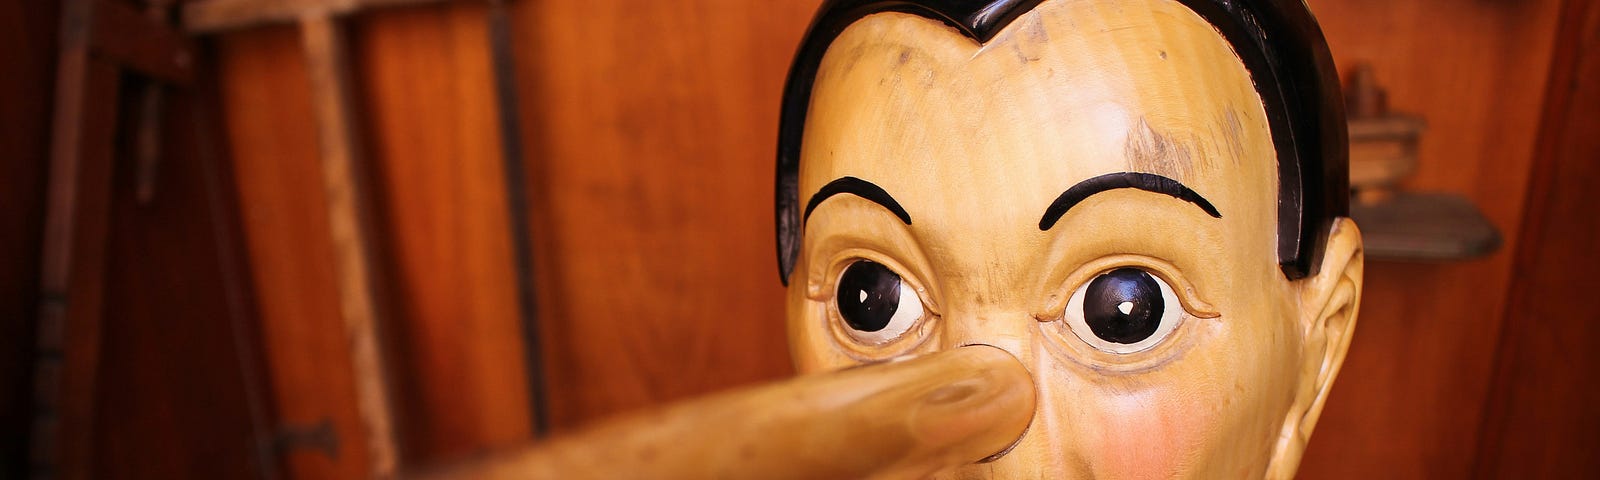 an old-fashioned wooden face of a child resembling Pinocchio with a long exaggerated nose